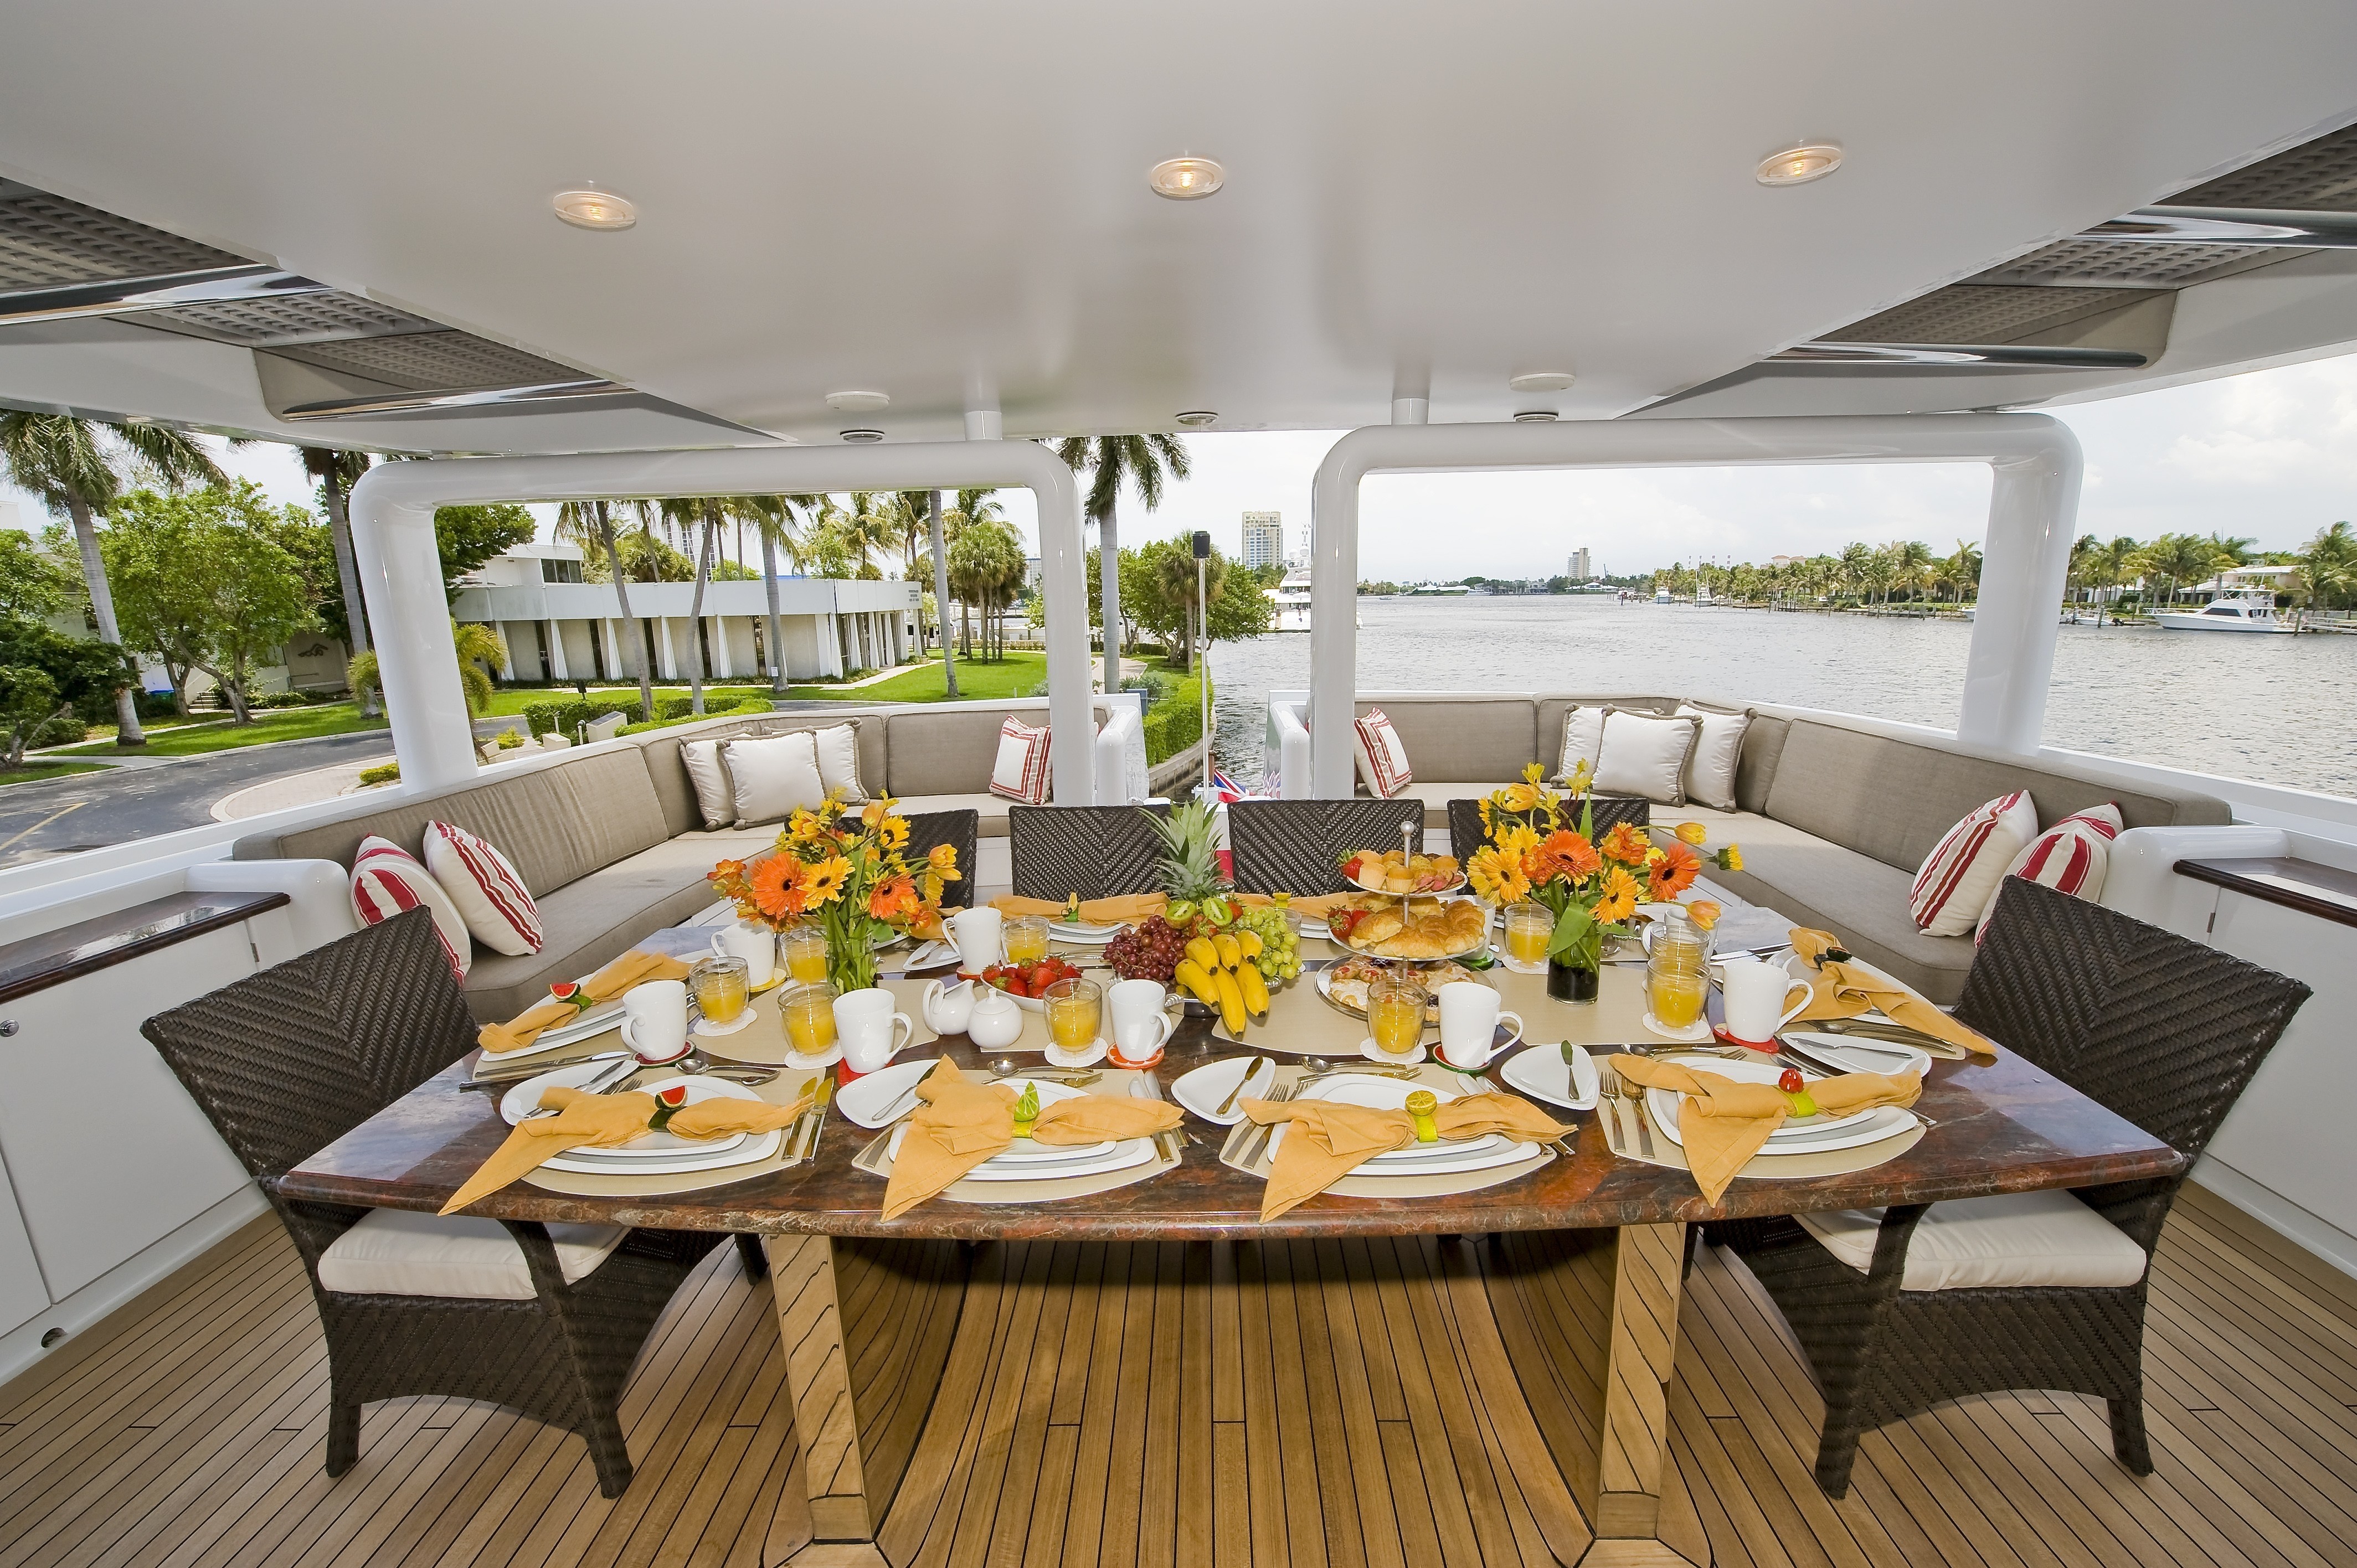 External Eating/dining Aboard Yacht TRIUMPHANT LADY